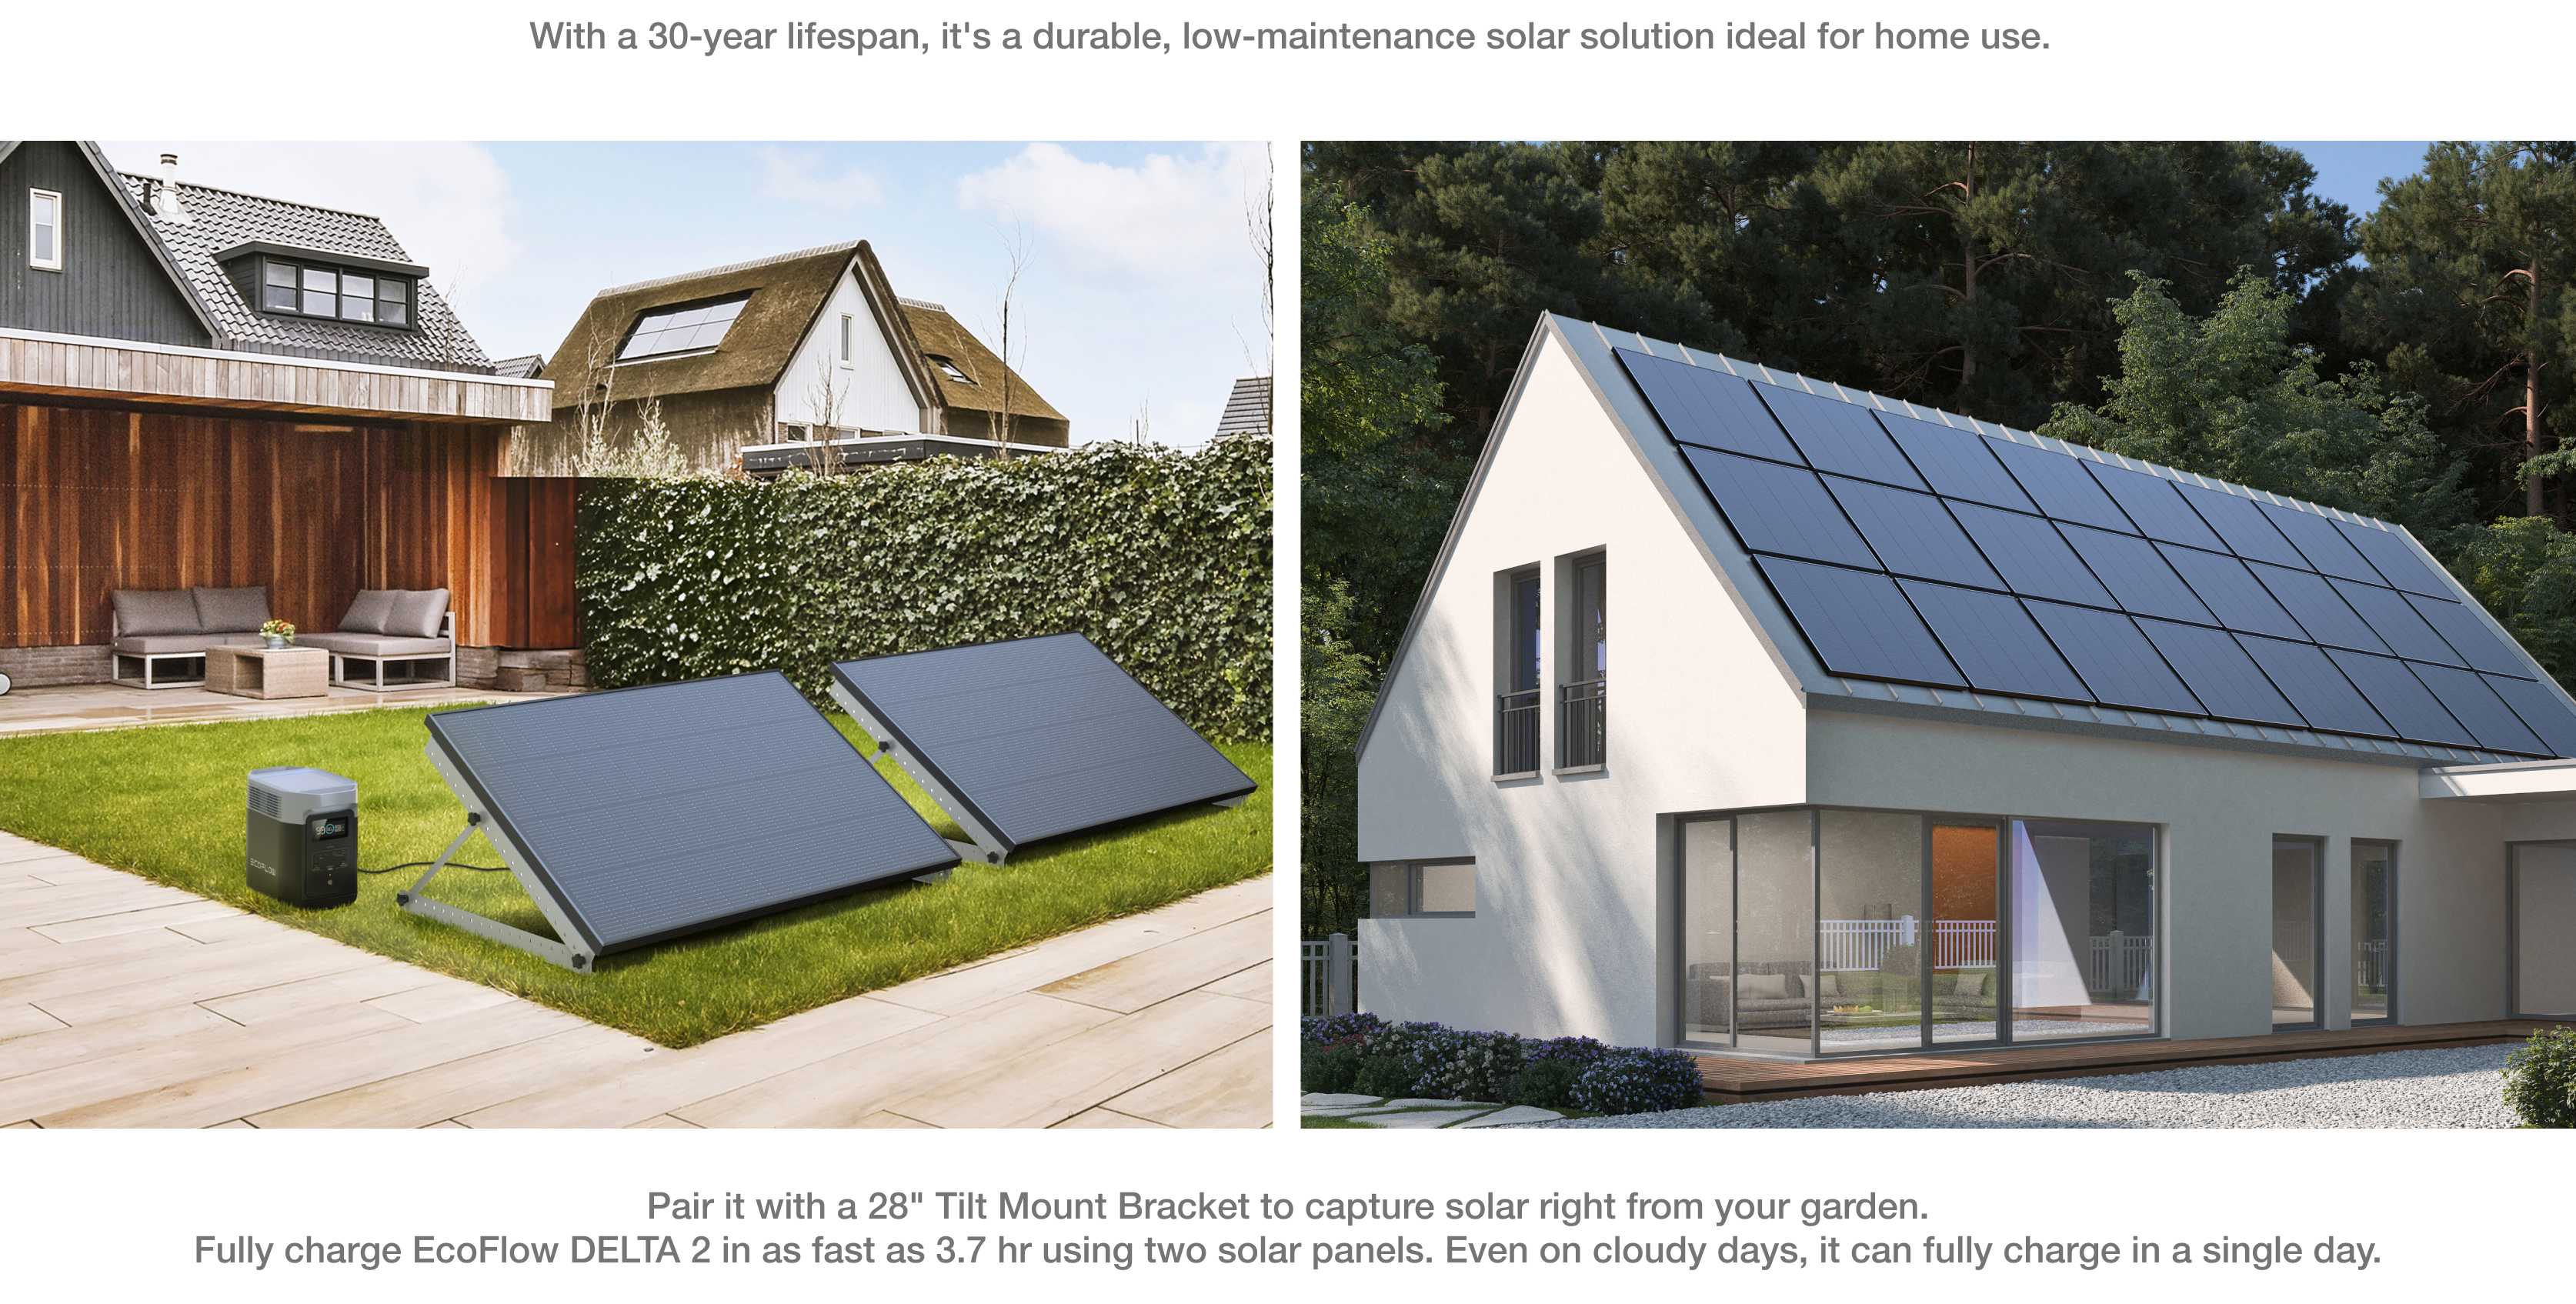 Long-lasting solar solution for your home